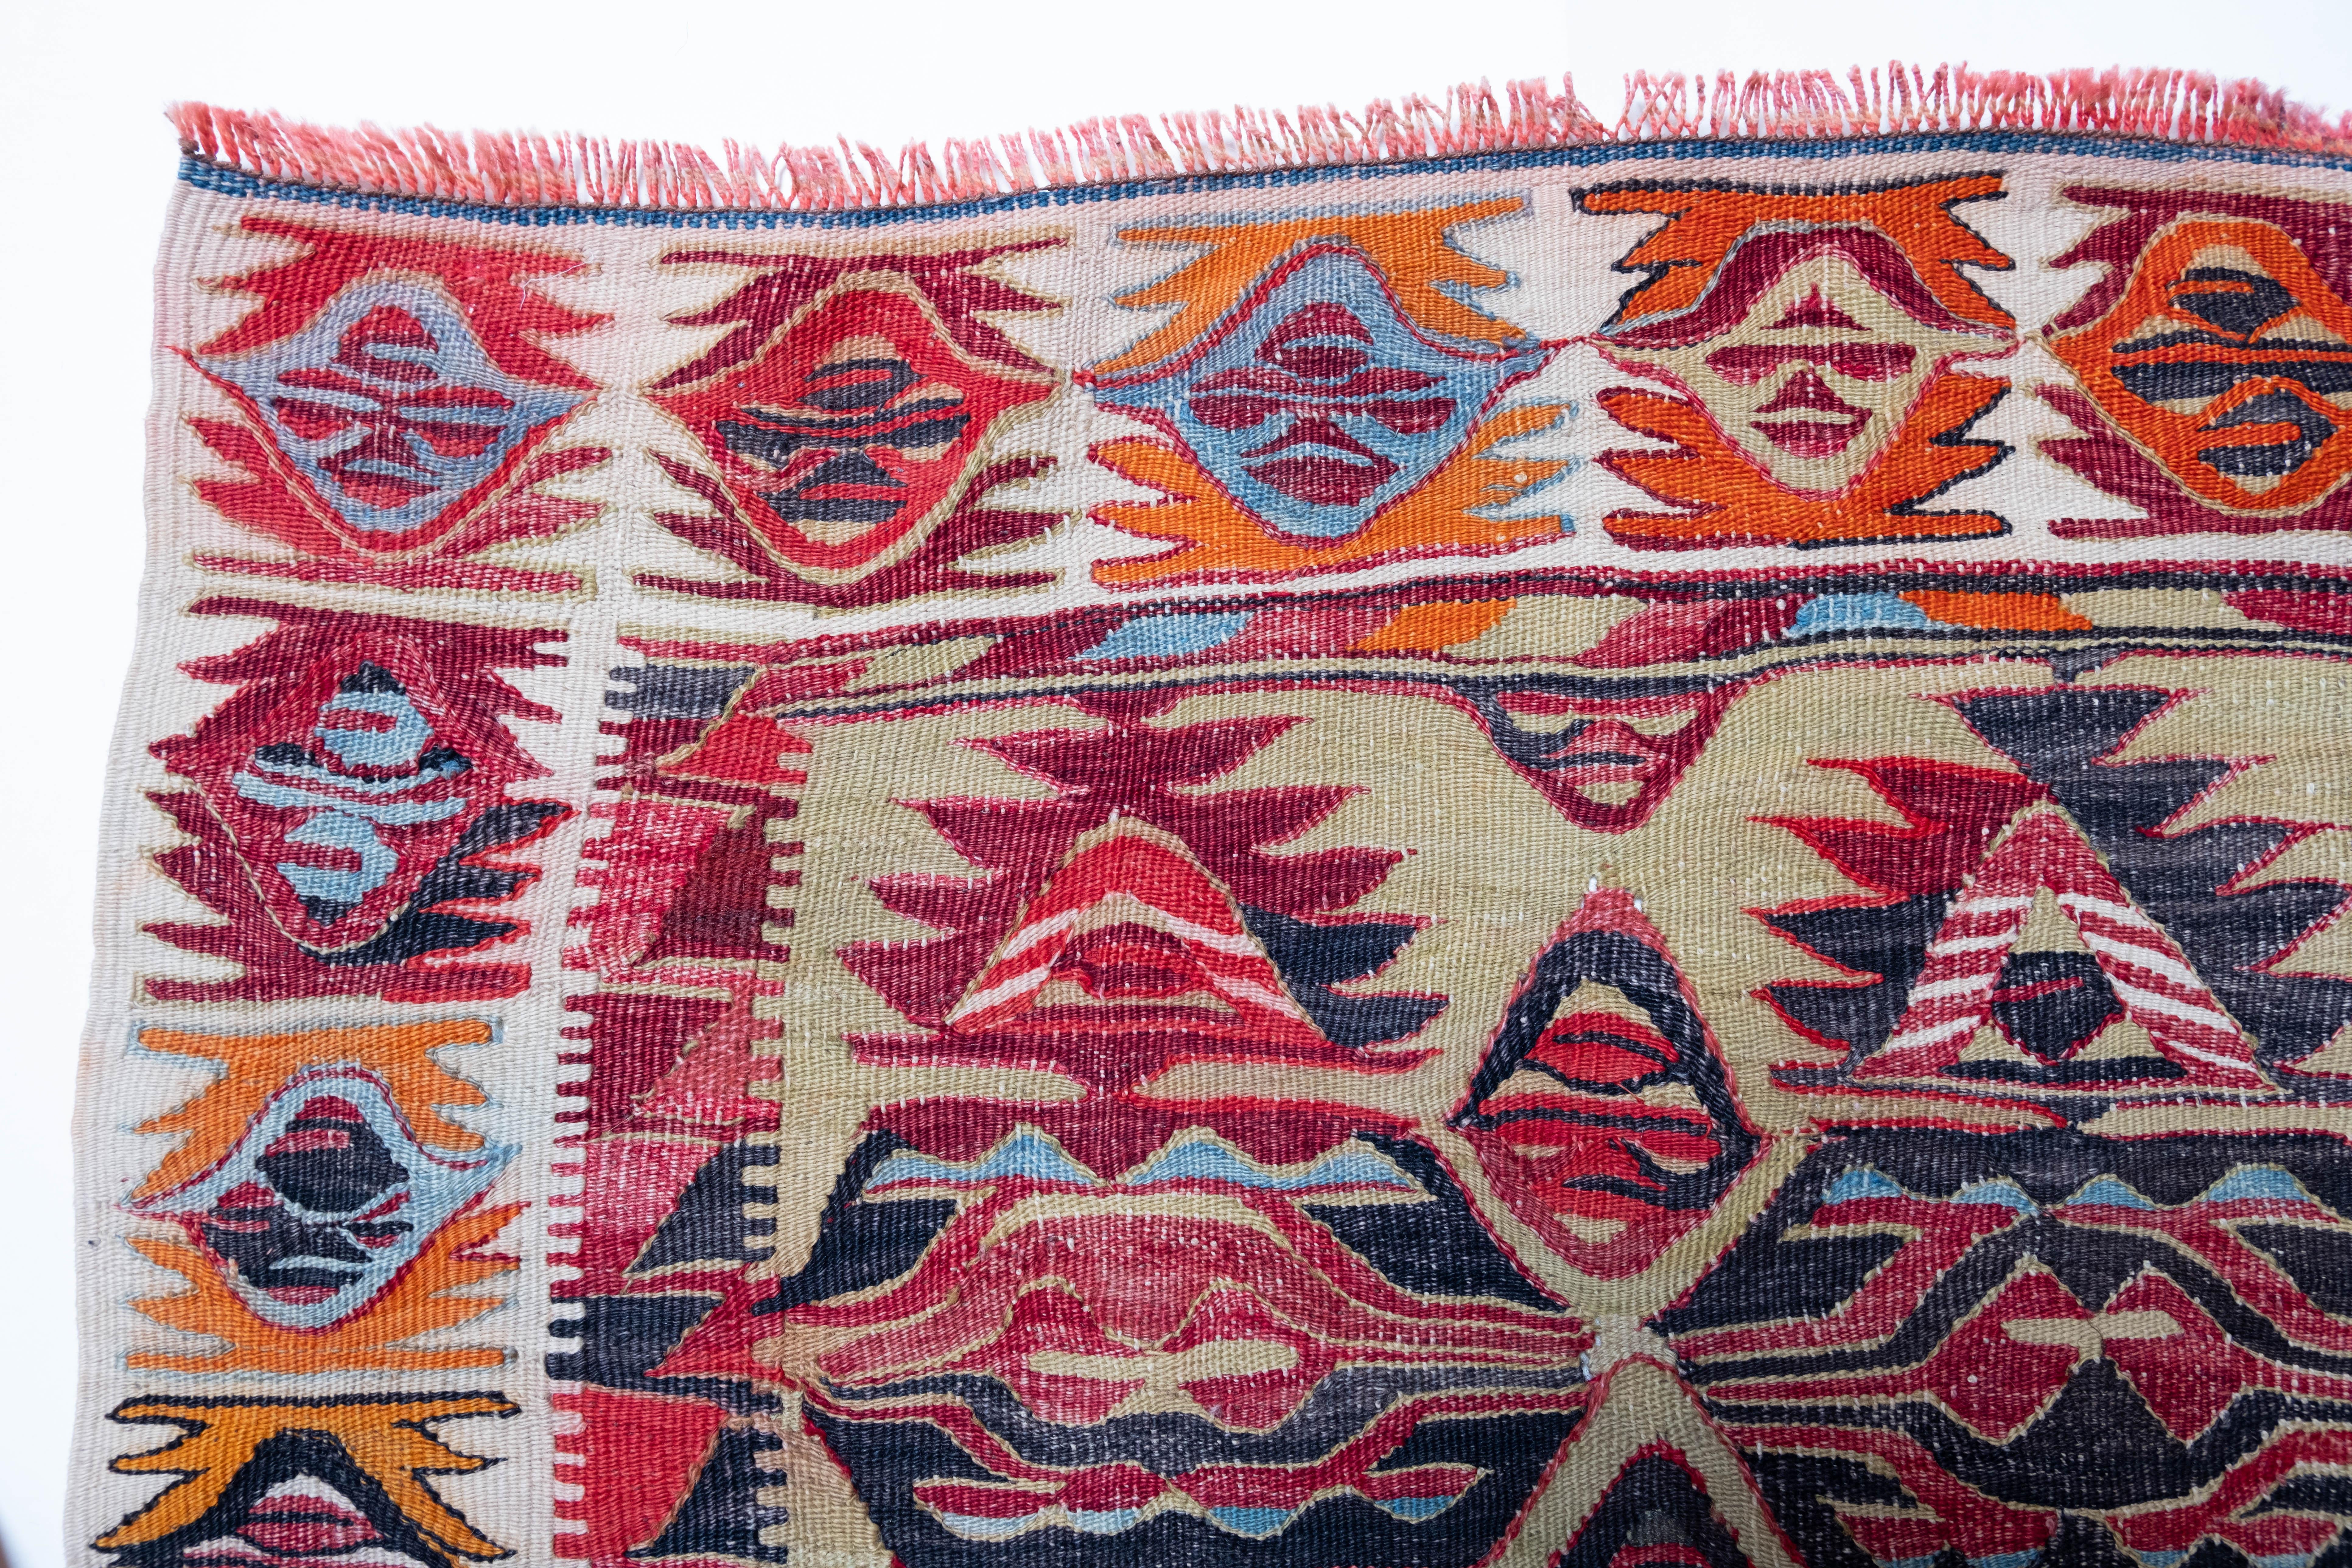 This is Central Anatolian Antique Kilim from the Hotamis, Konya region with a rare and beautiful color composition.

This highly collectible antique kilim has wonderful special colors and textures that are typical of an old kilim in good condition.